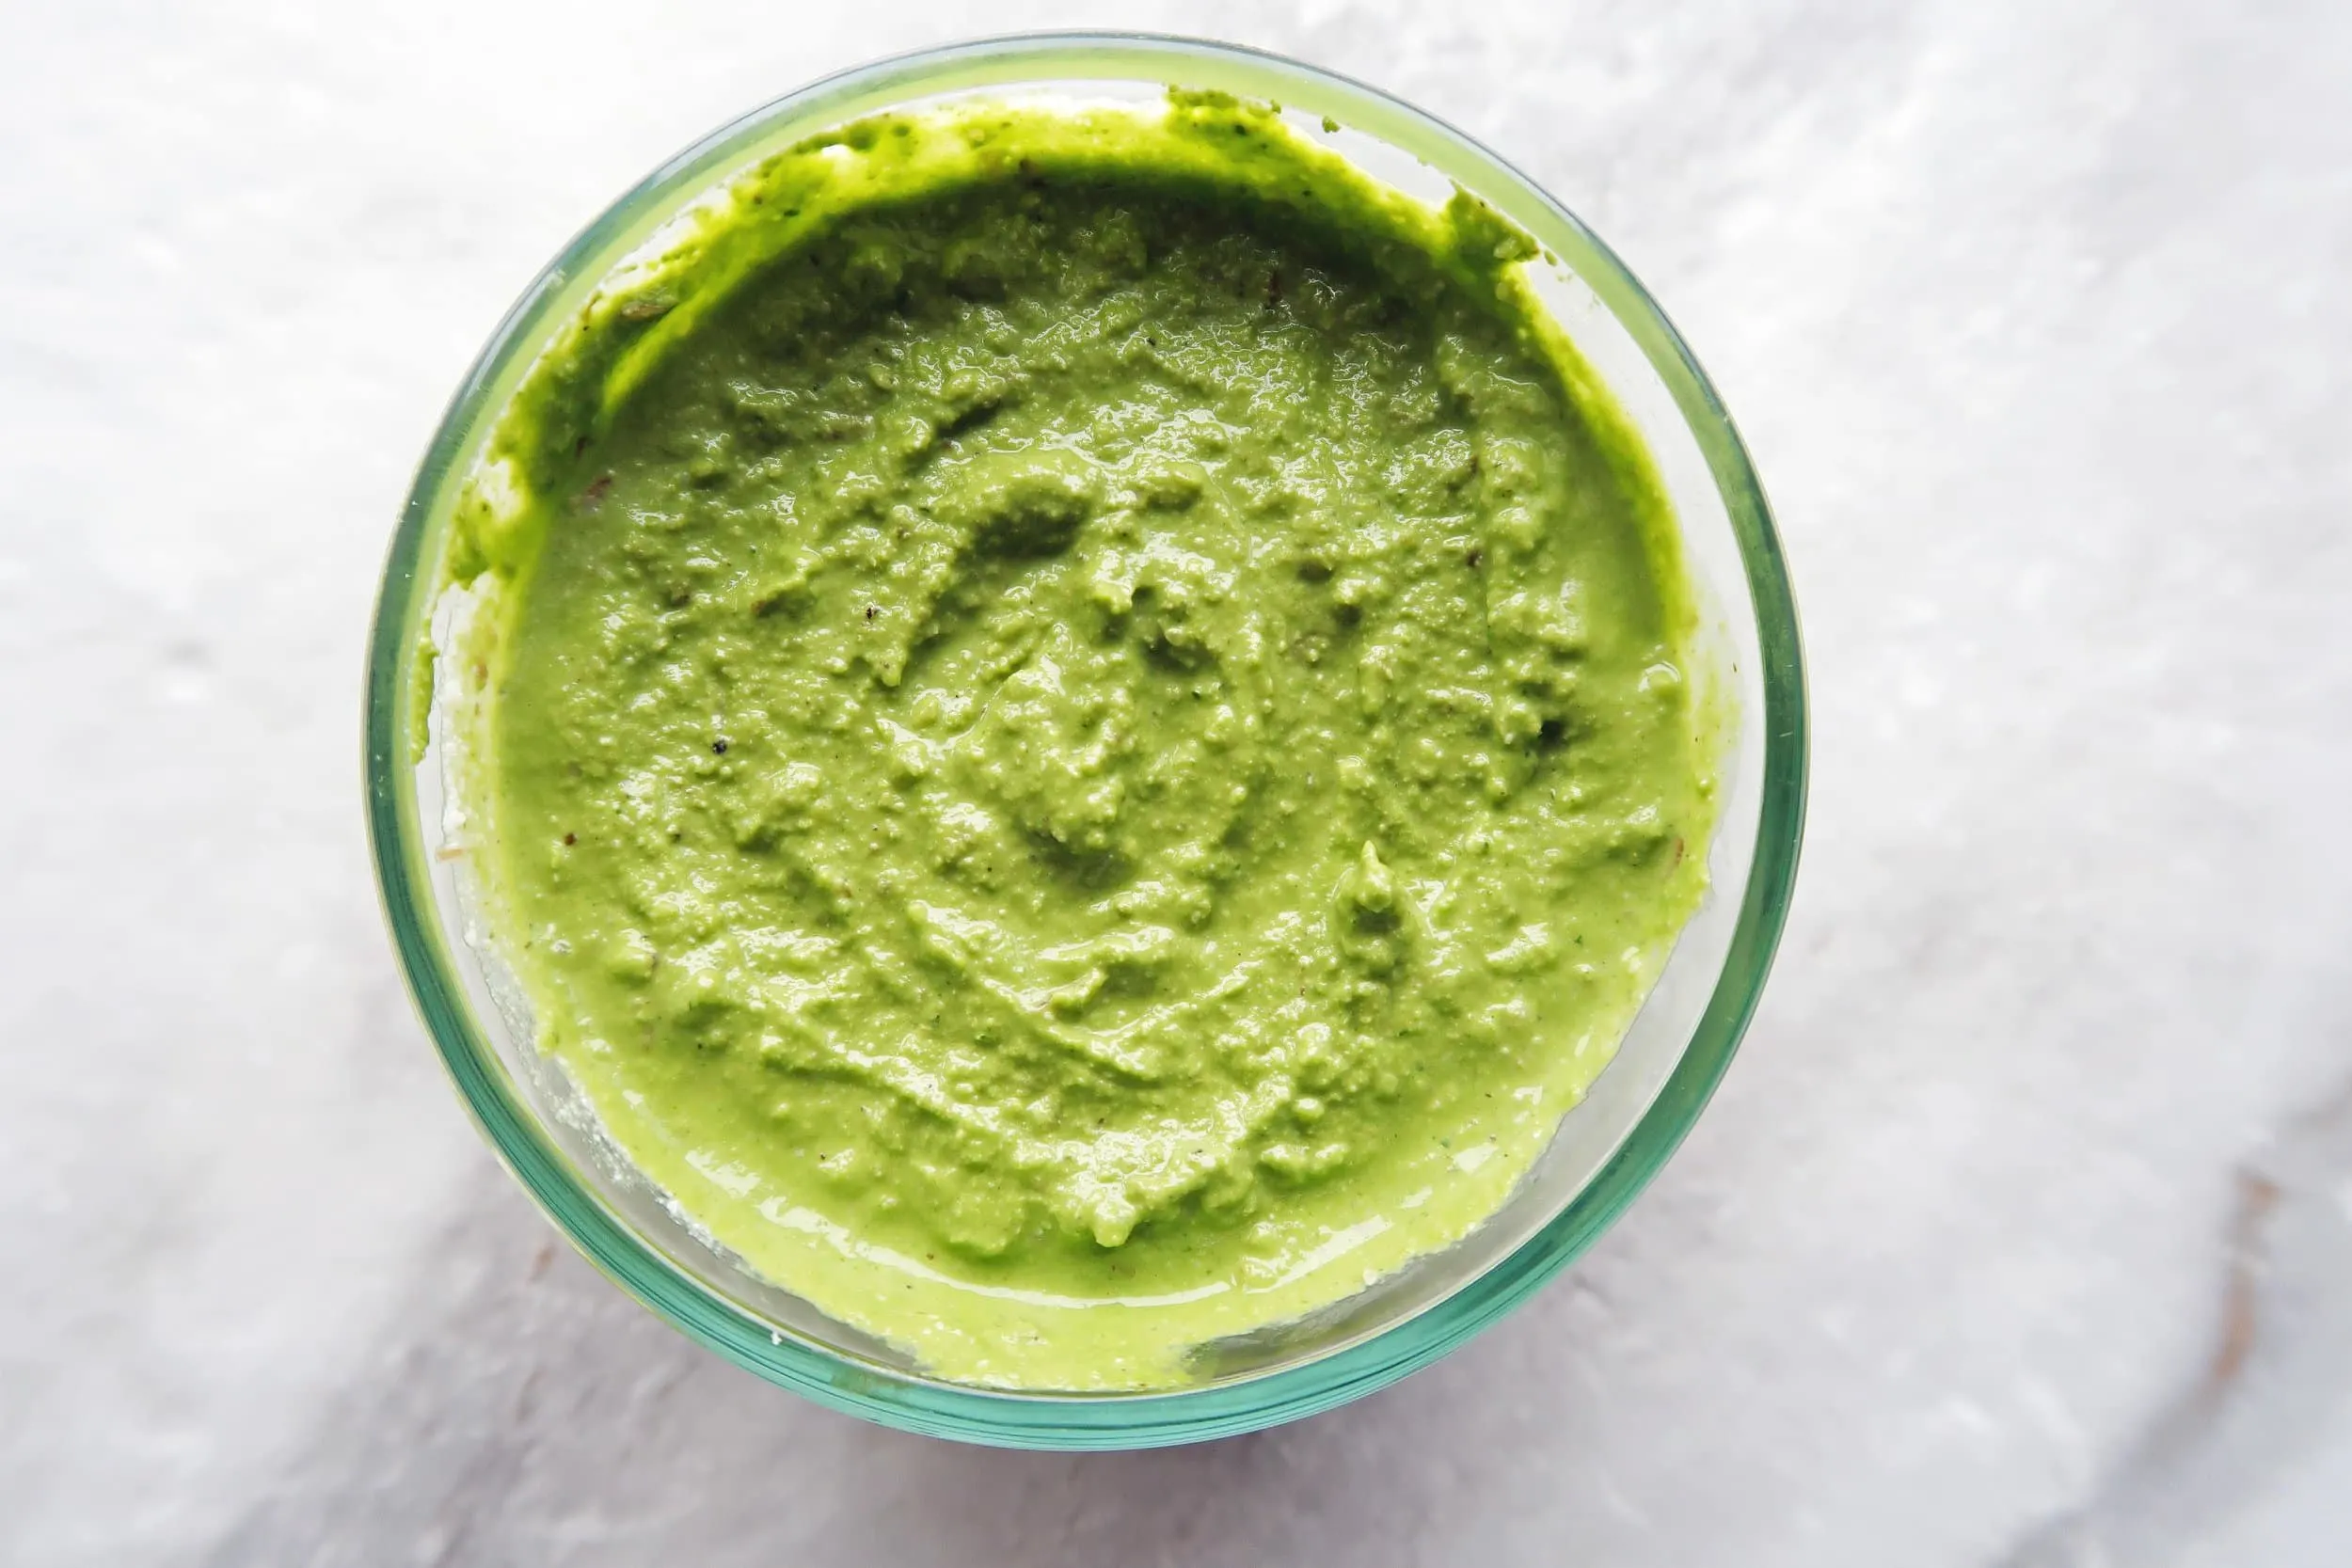 A smooth and creamy pesto in a bowl.